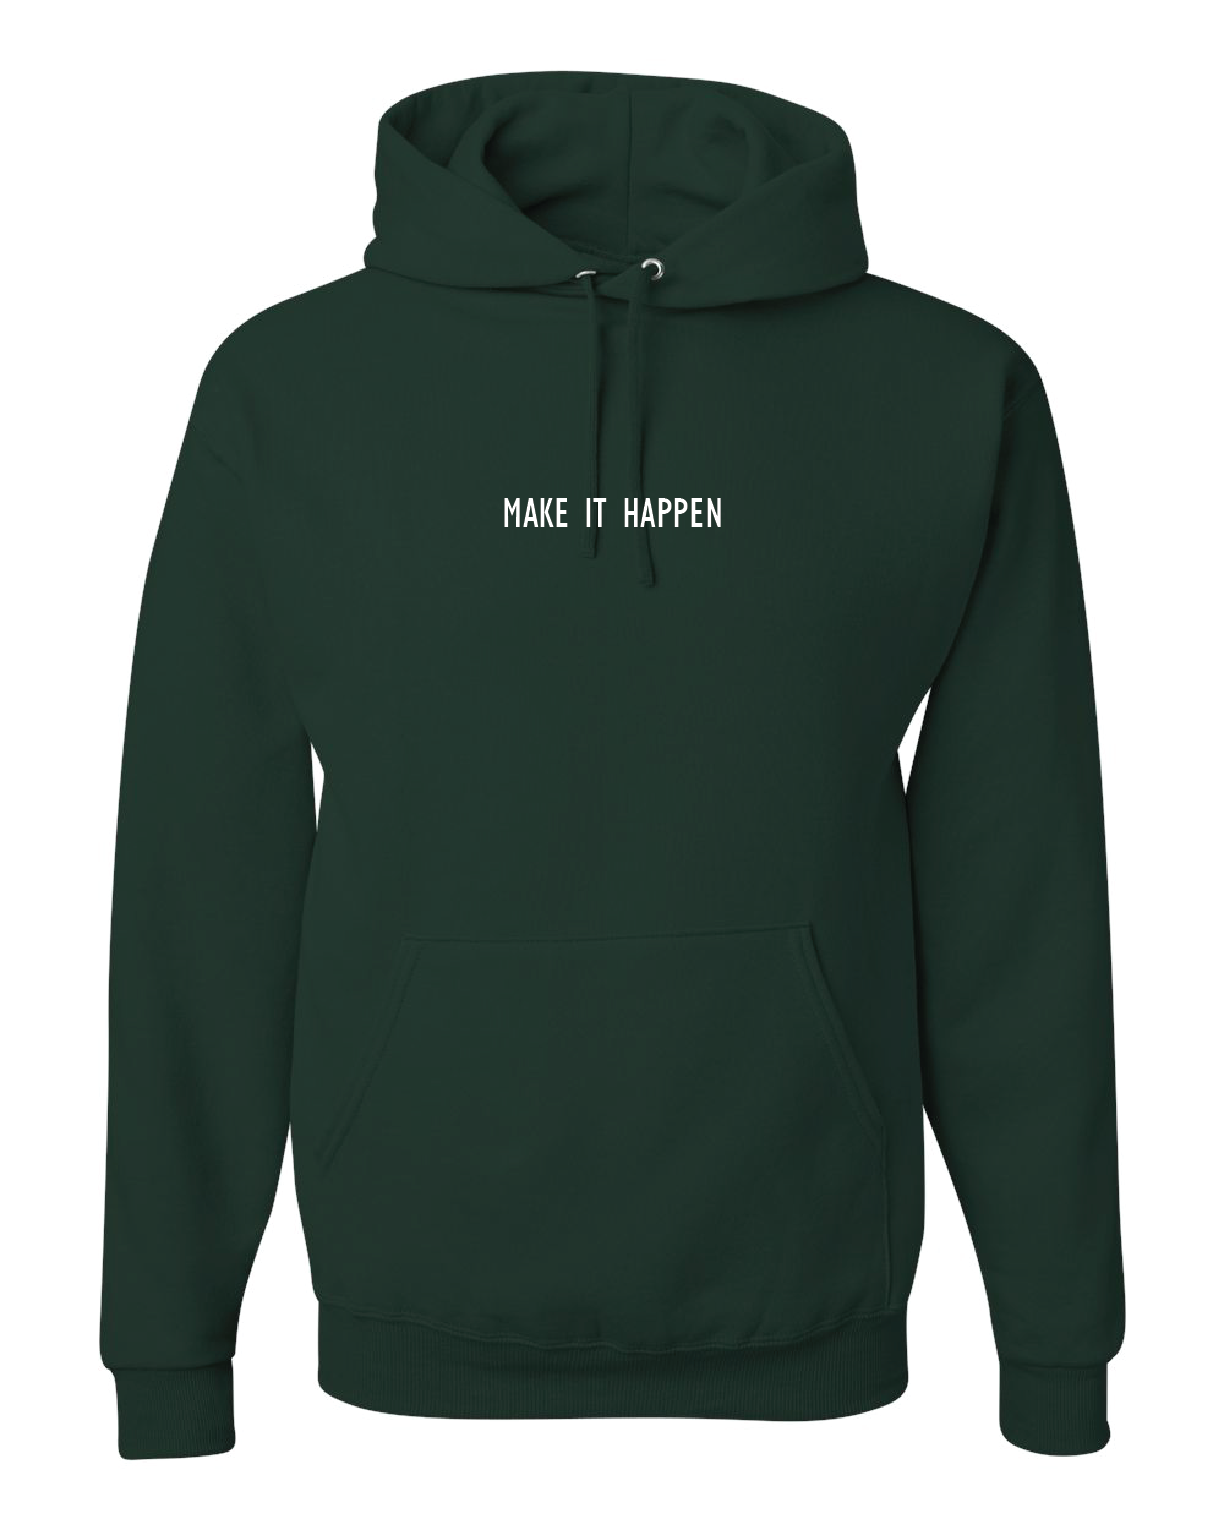 Make it happen hoodie - Forest - S Only